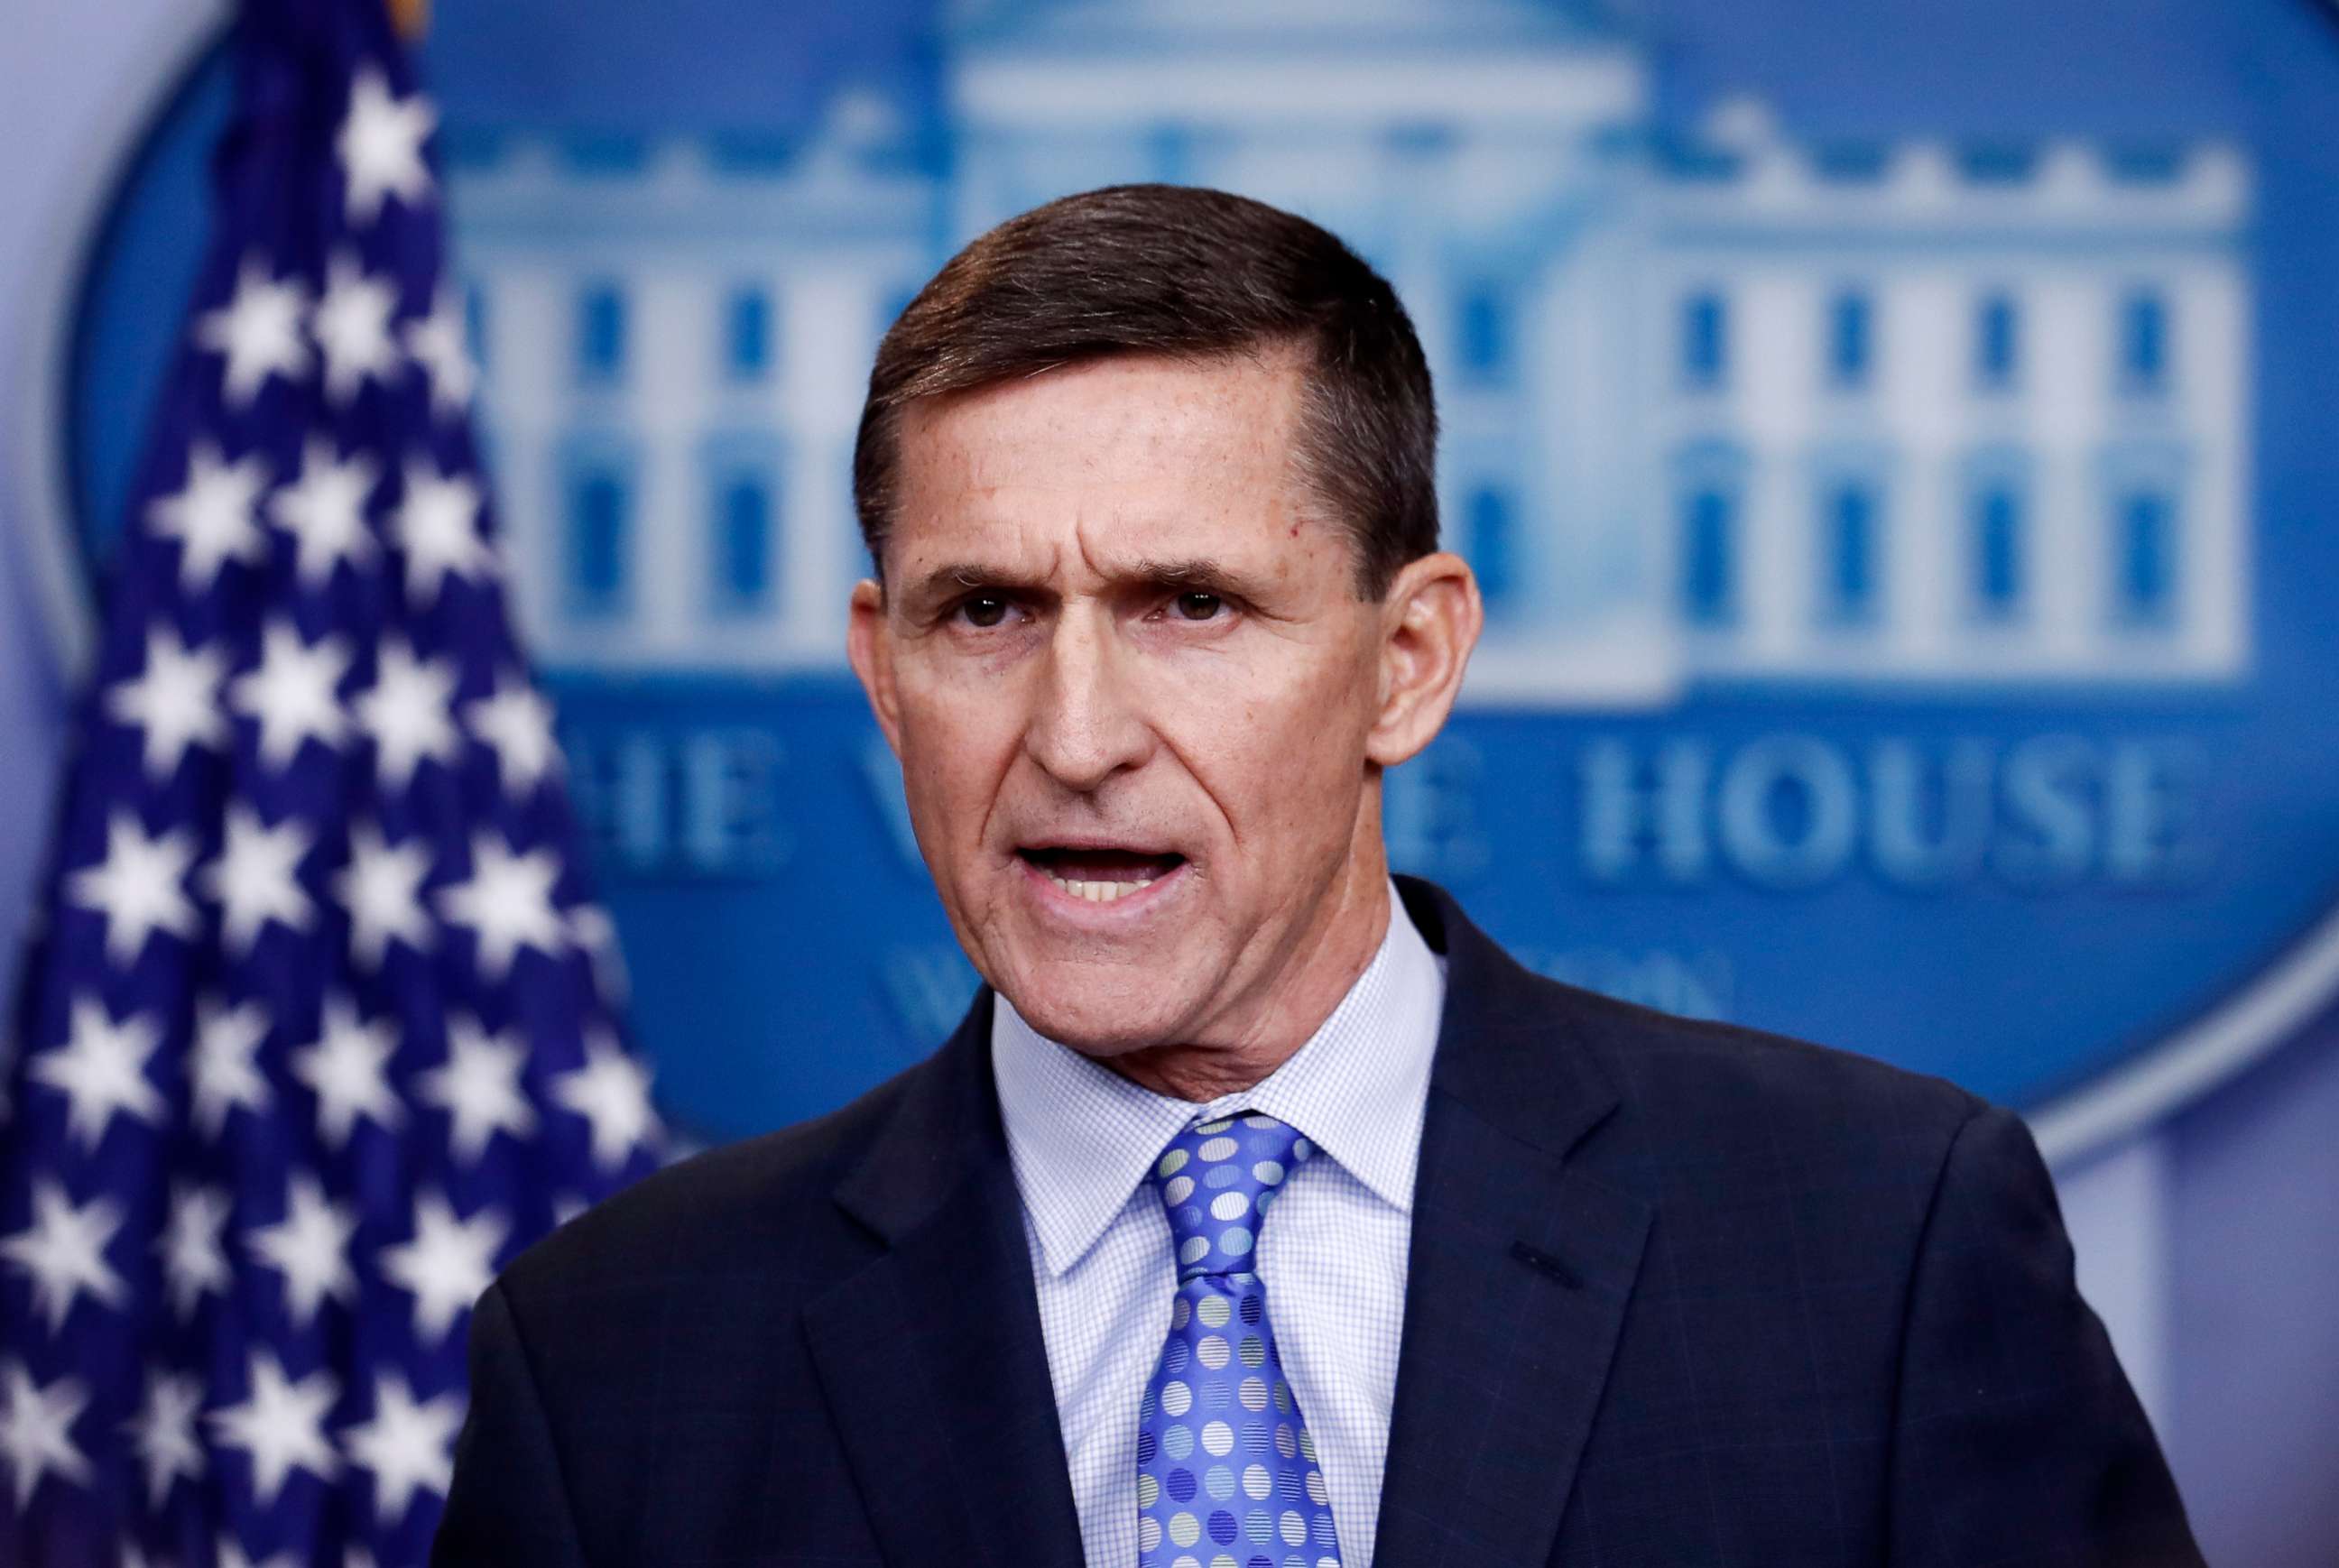 PHOTO: Former National Security Adviser Michael Flynn during the daily news briefing at the White House, Feb. 1, 2017, in Washington, D.C.  